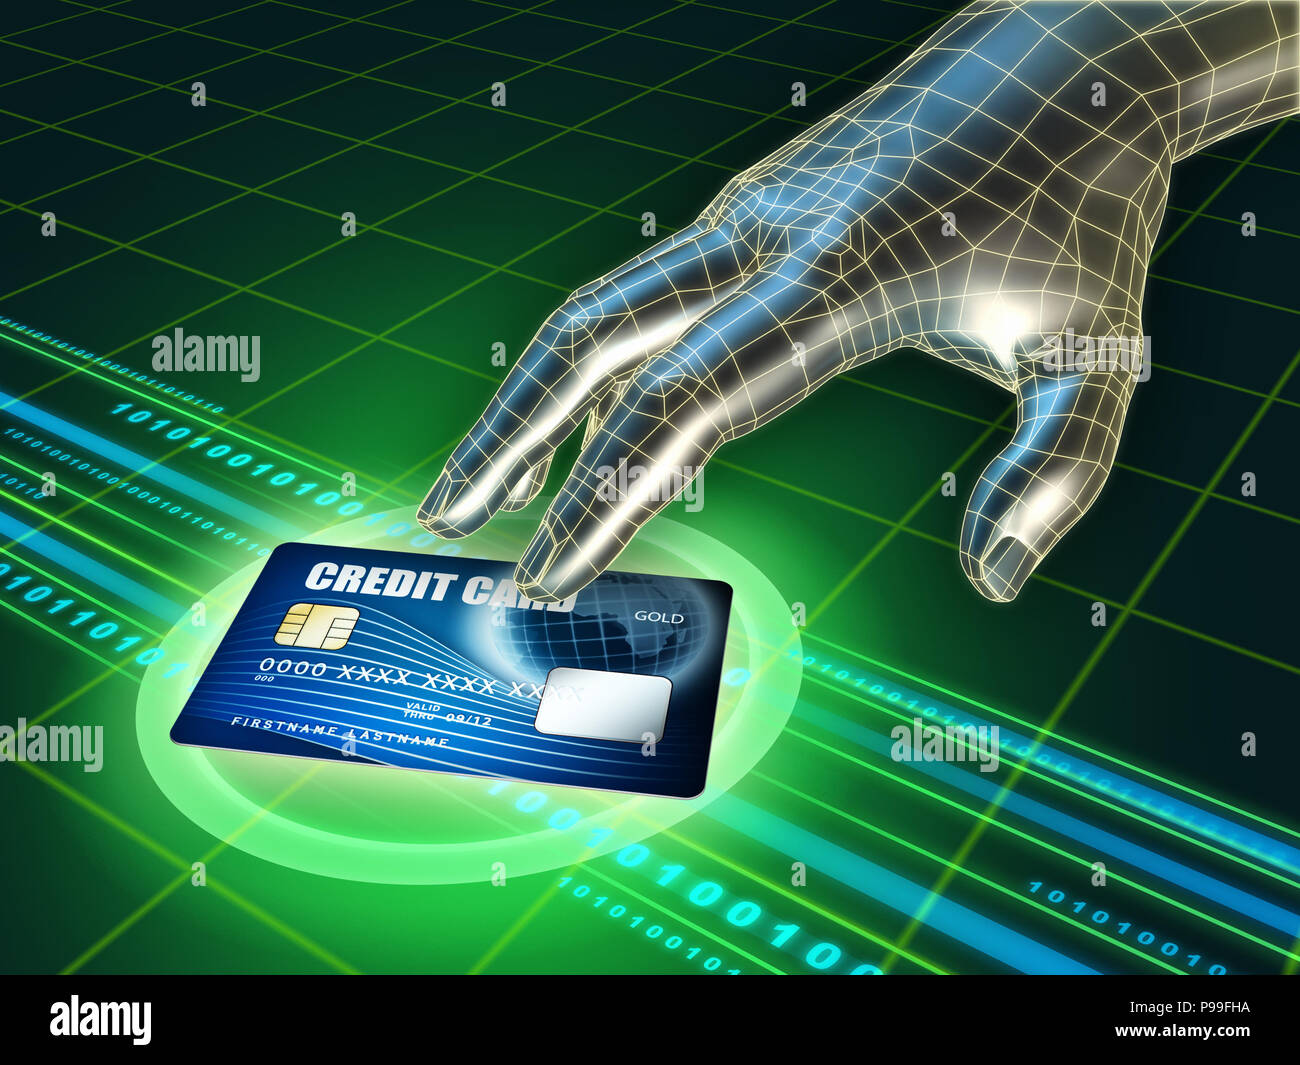 Hacker's hand trying to steal a credit card. Digital illustration. Stock Photo